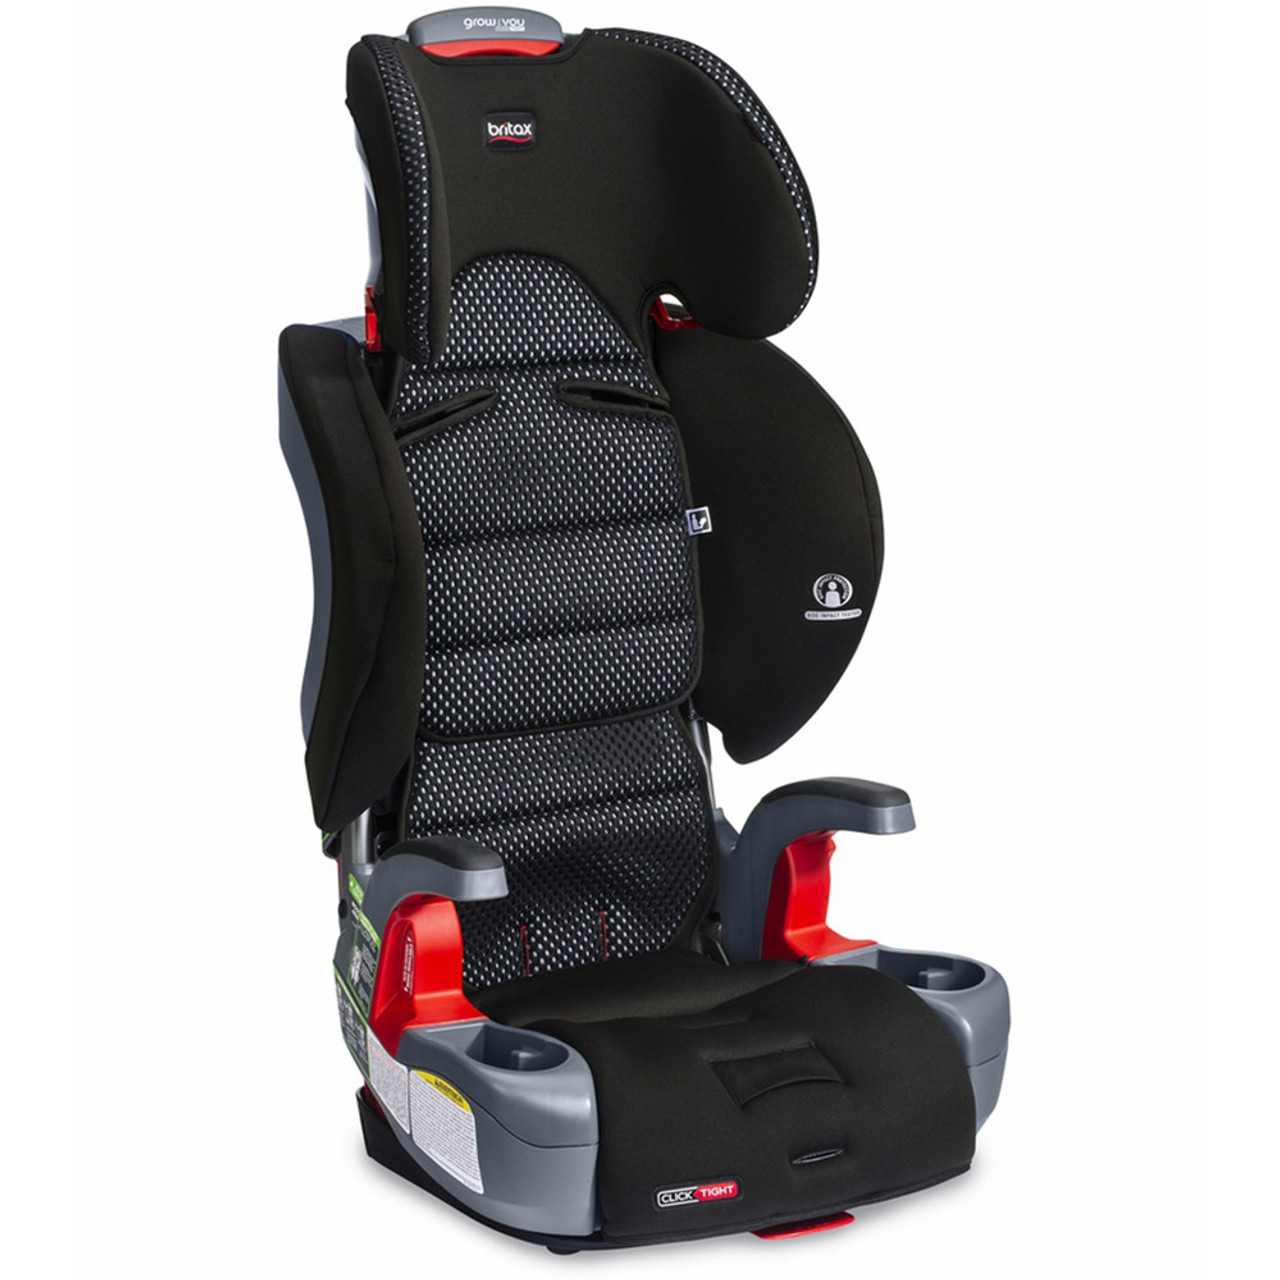 Is your little one ready for a booster seat? Here's a rundown on boost, Car Seat